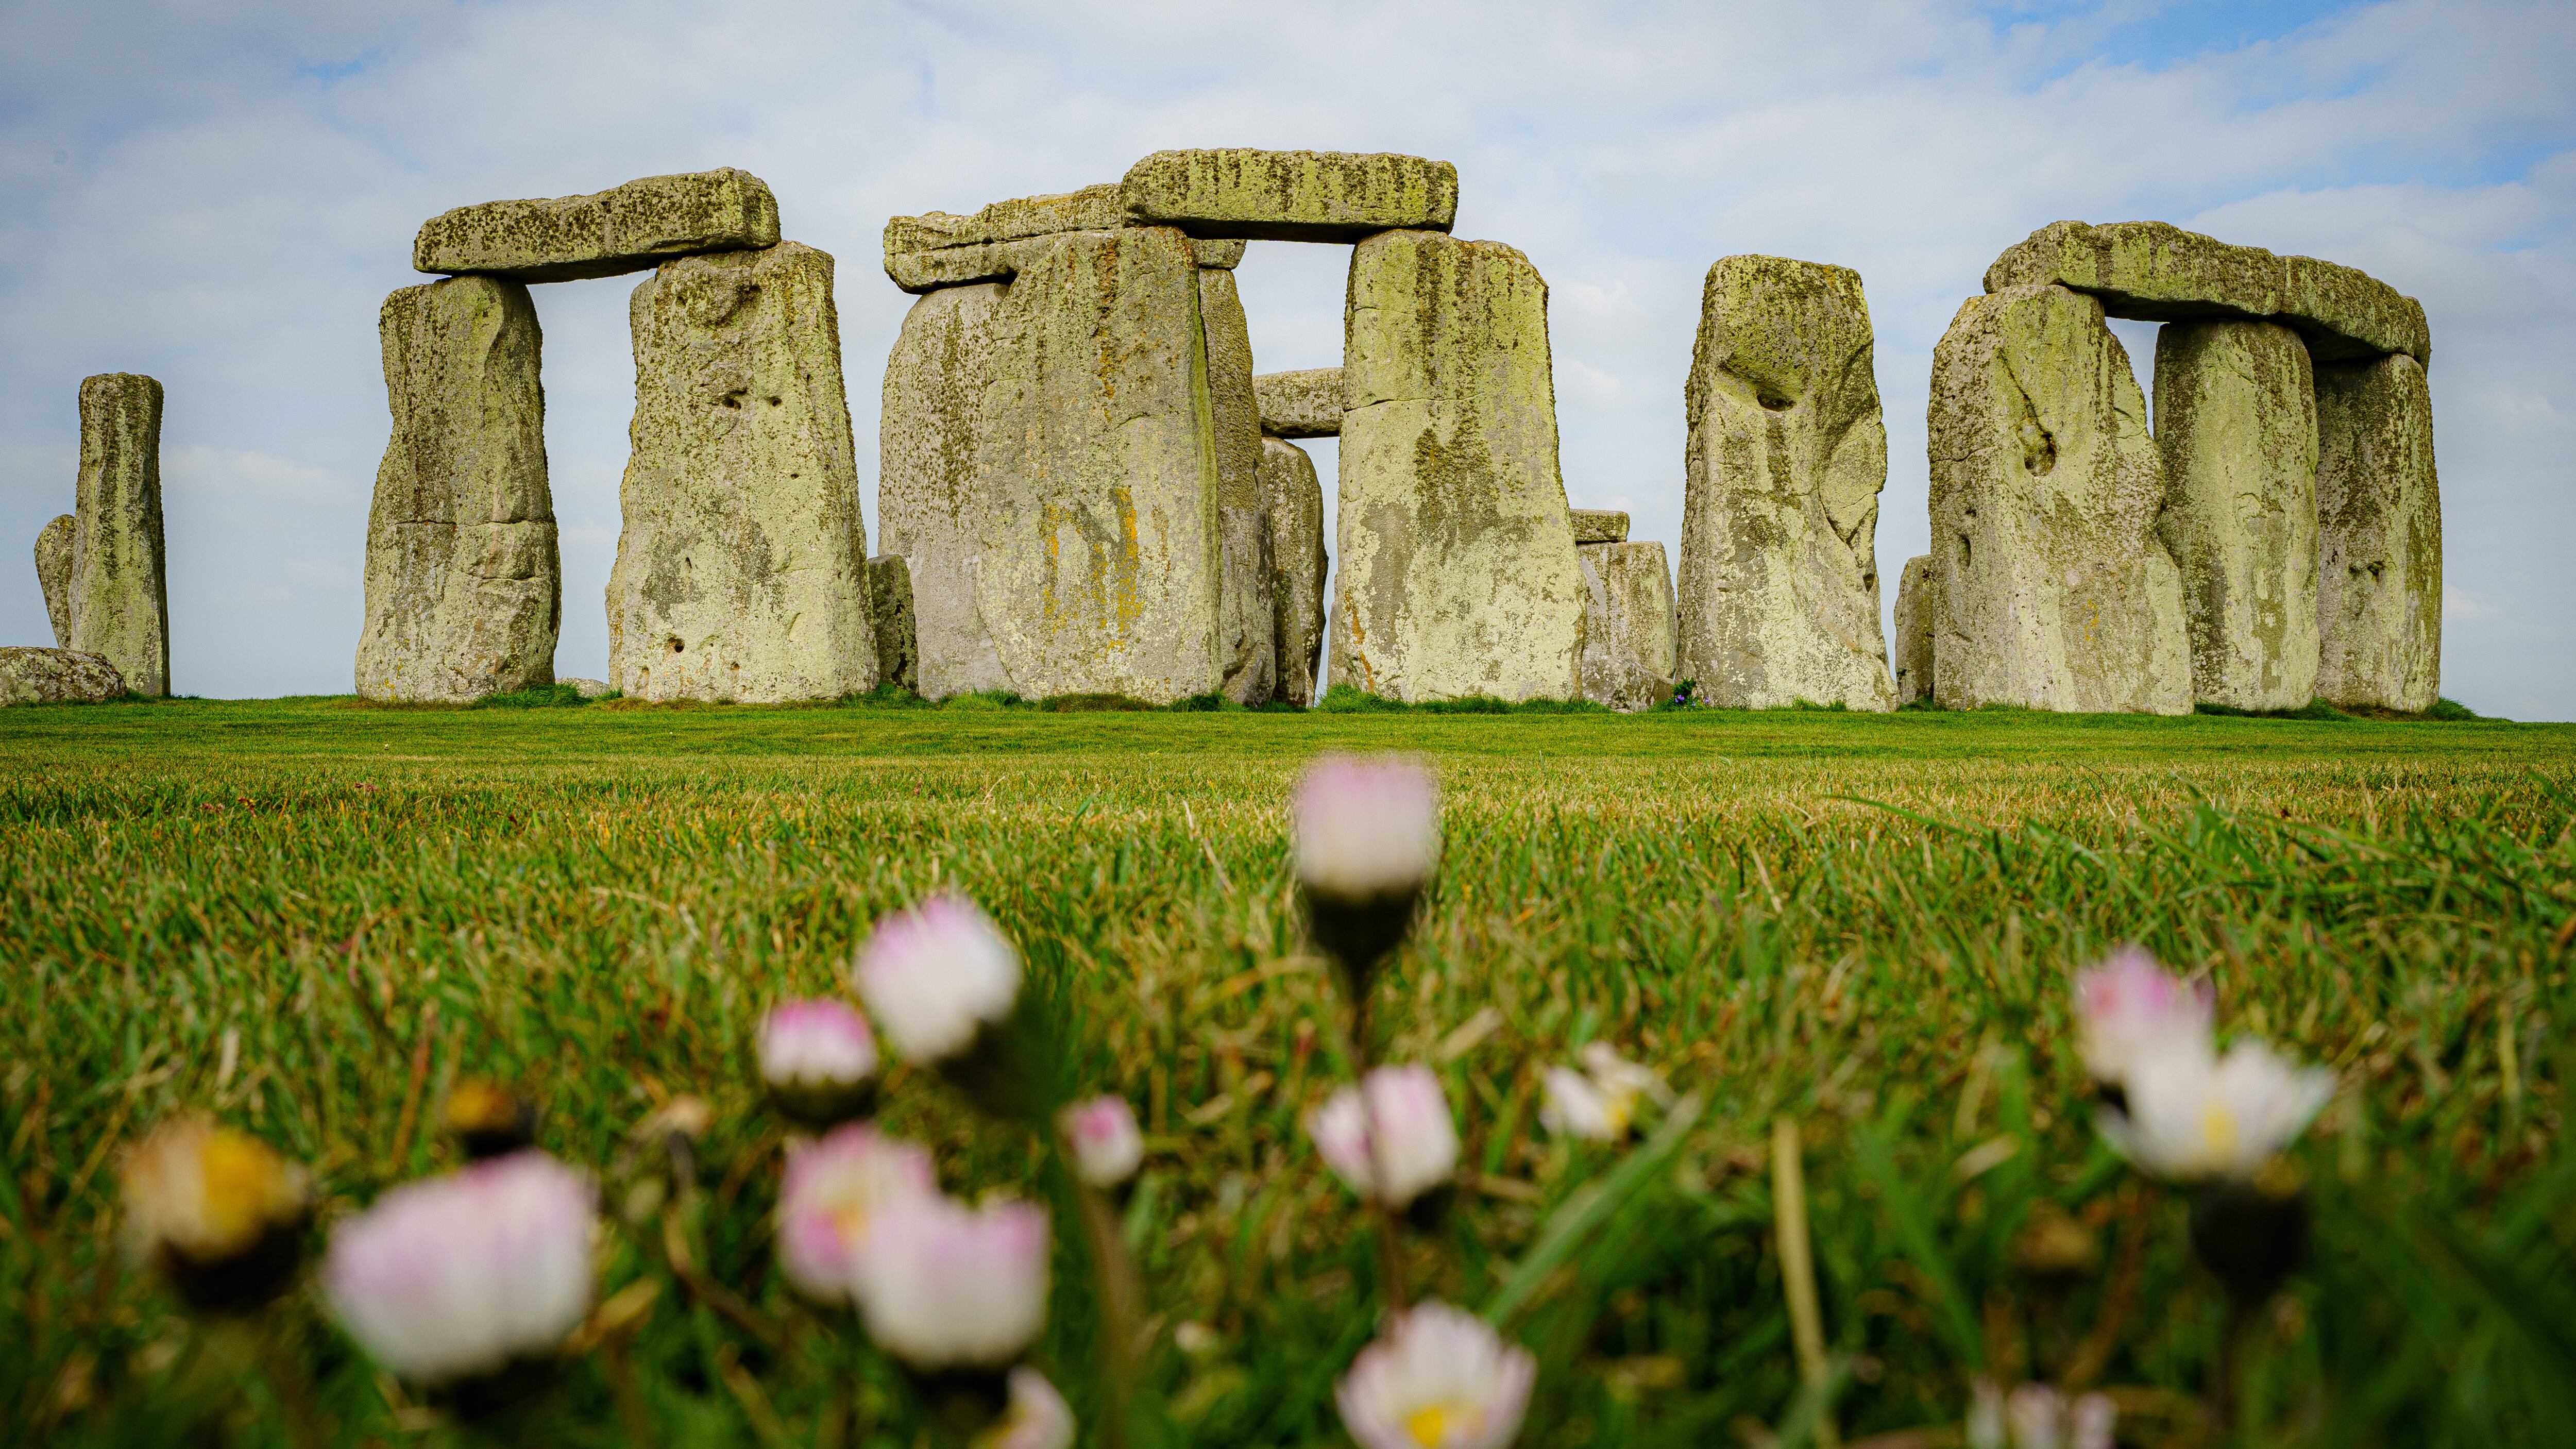 It has been suggested that Stonehenge be added to Unesco’s World Heritage in Danger list